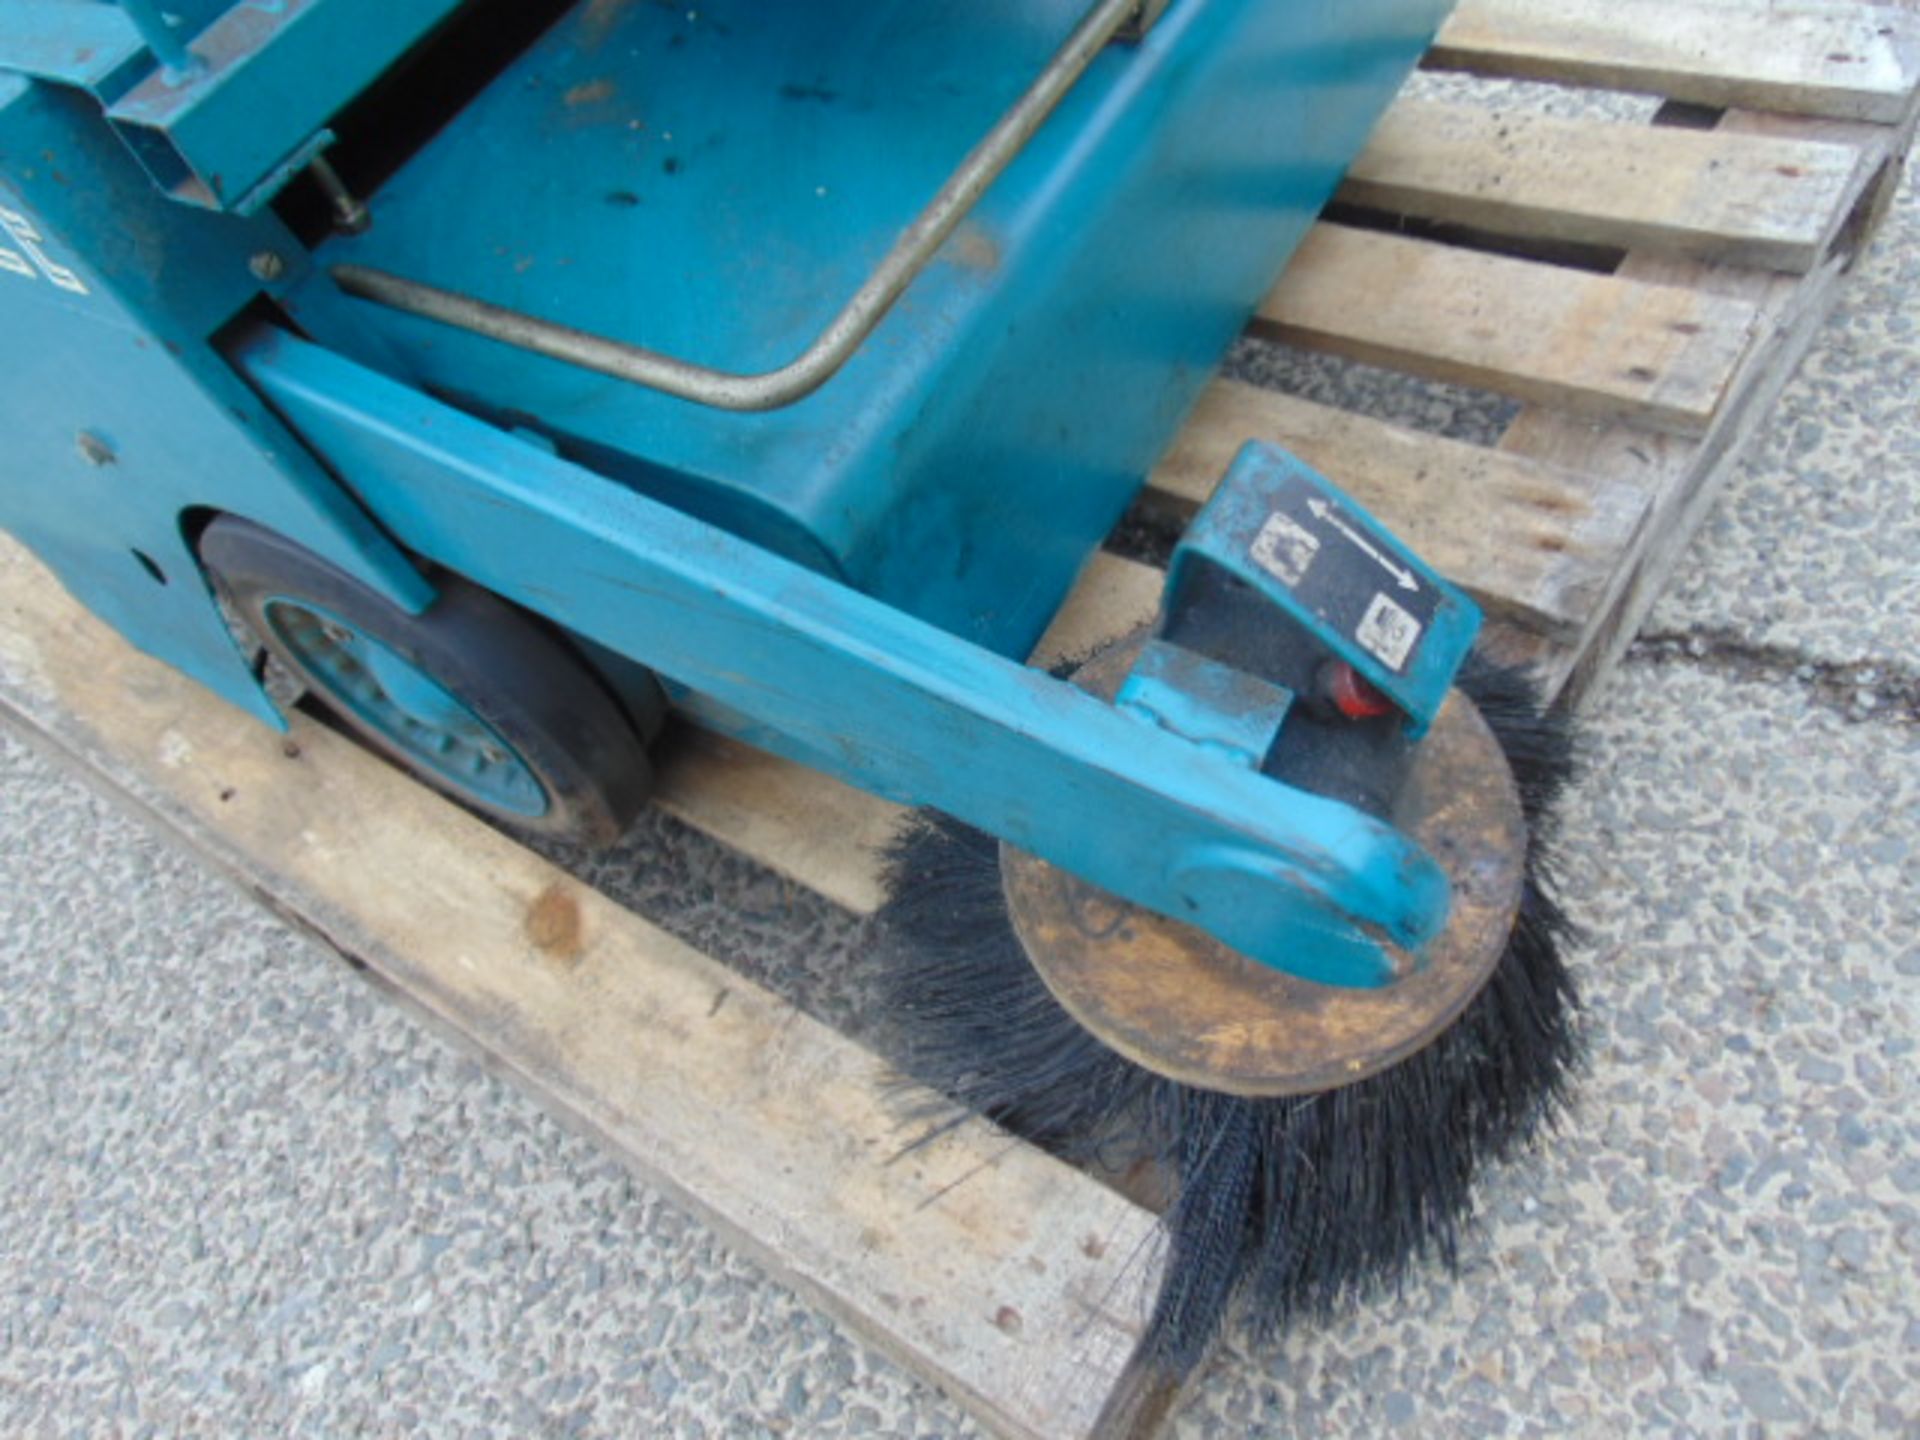 Tennant 42E Walk Behind Electric Sweeper with Vacuum Cleaner C/W Charger - Image 8 of 12